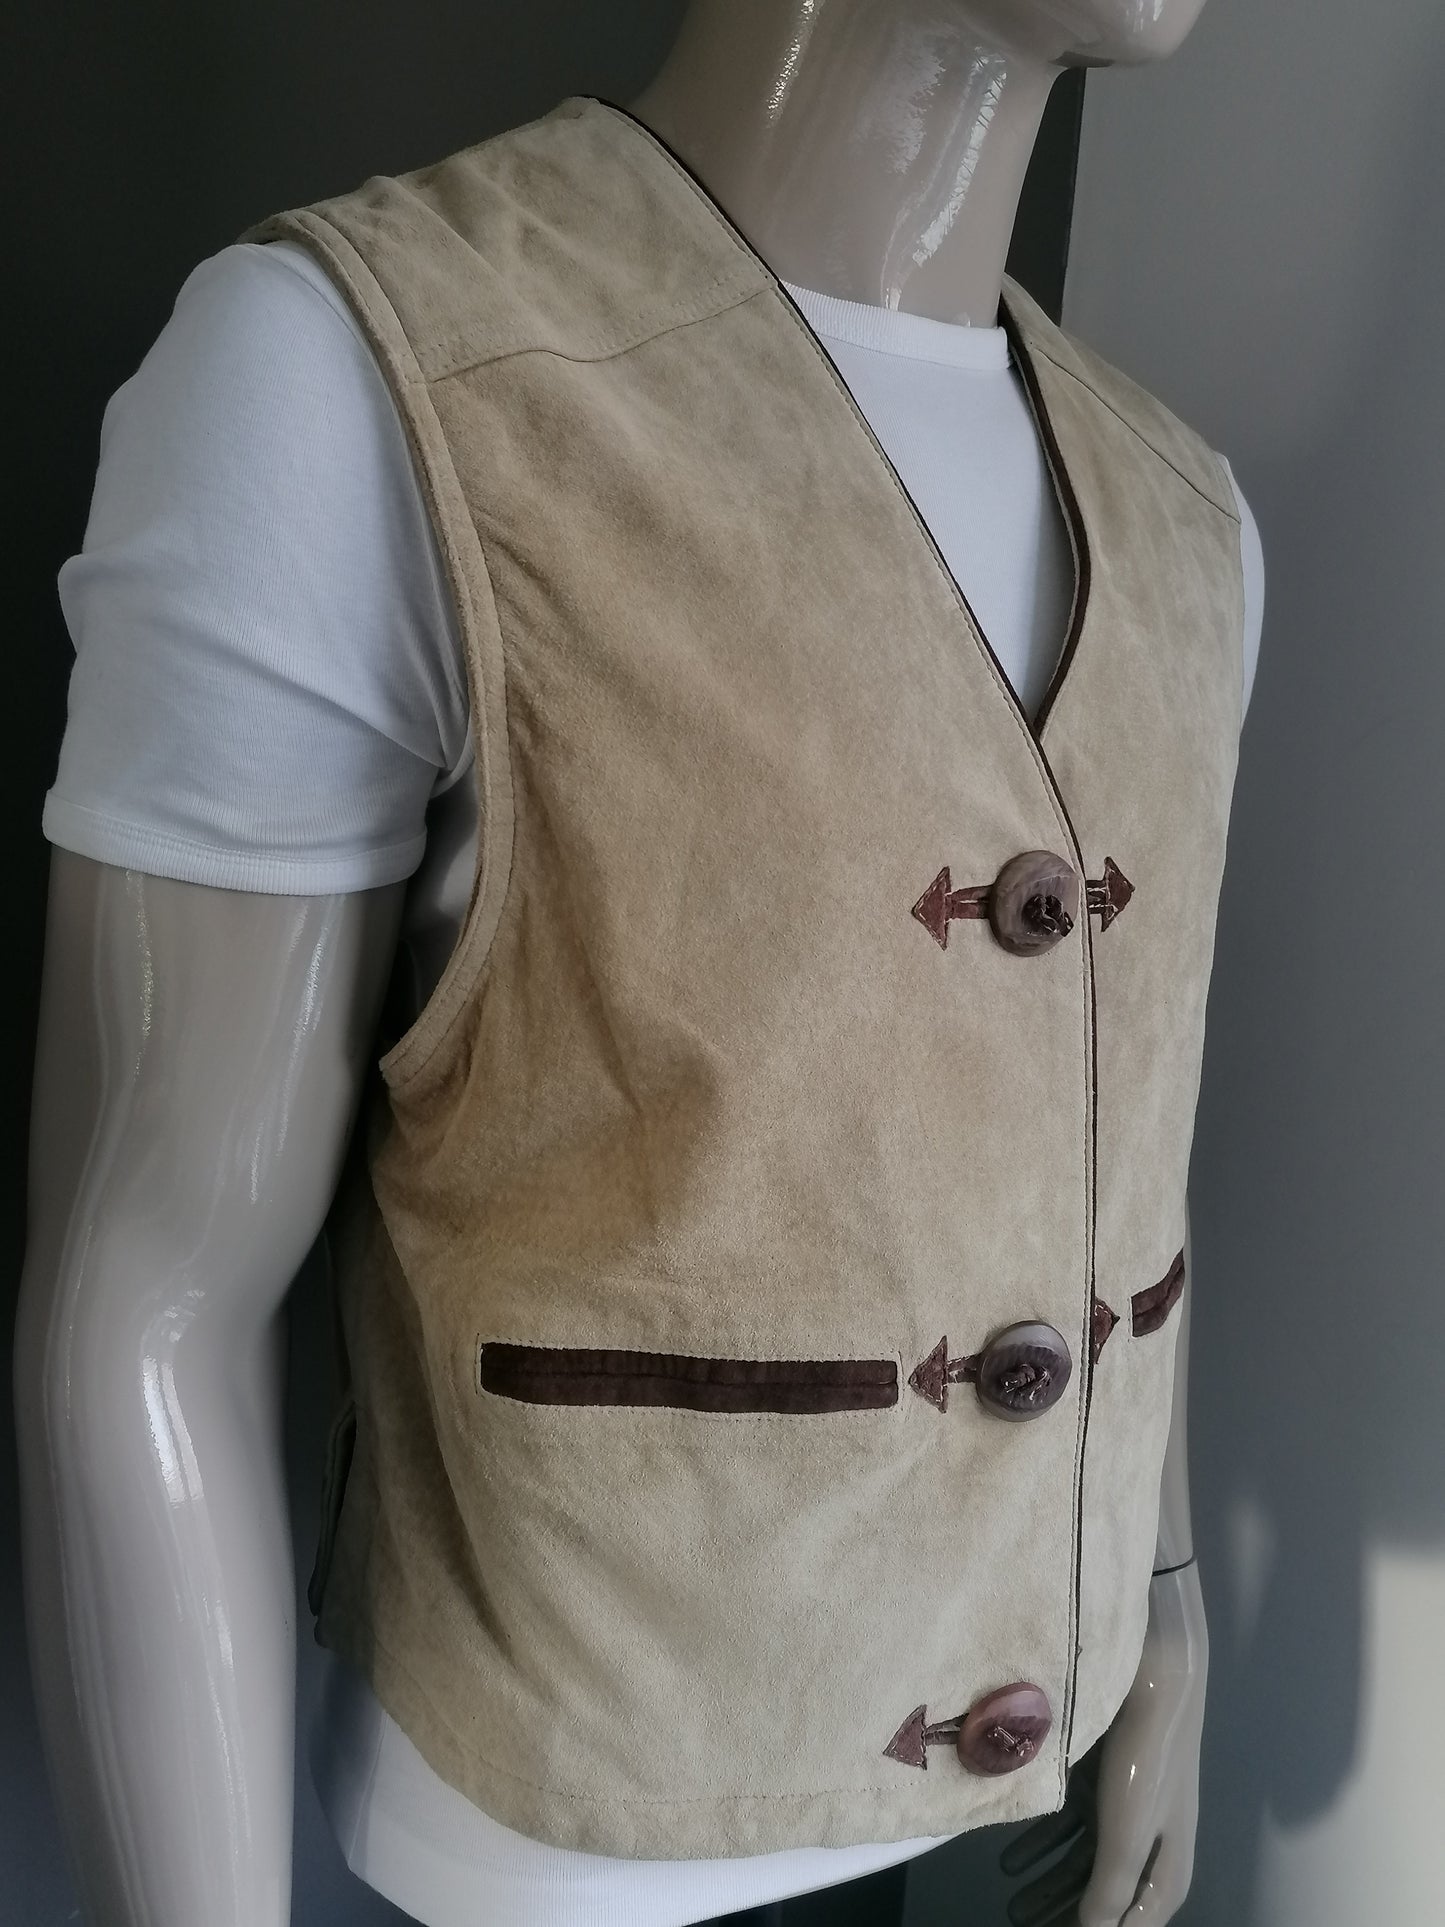 Leather / suede waistcoat. Beige brown colored. Large separate buttons. Embroidery rear. Size M.